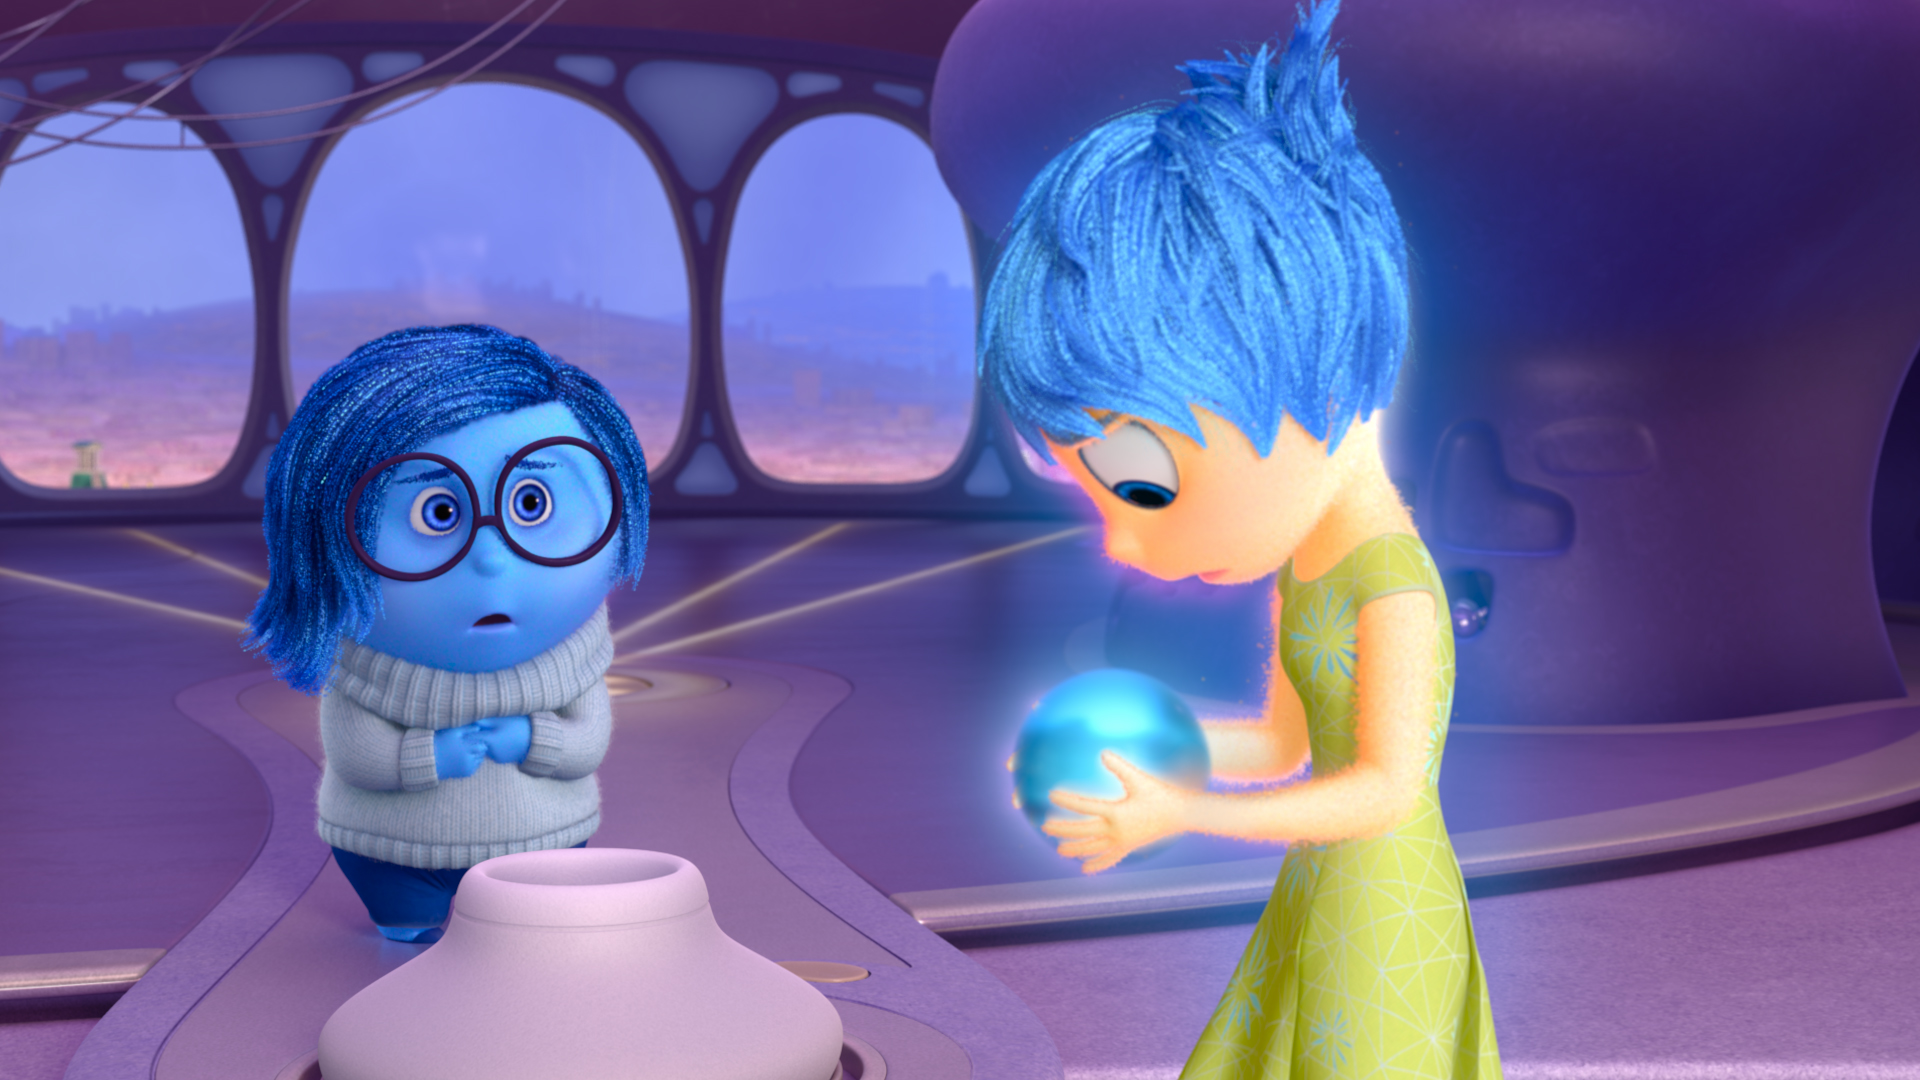 Pictured (L-R): Sadness, Joy. 2015 Disney Pixar. All Rights Reserved.